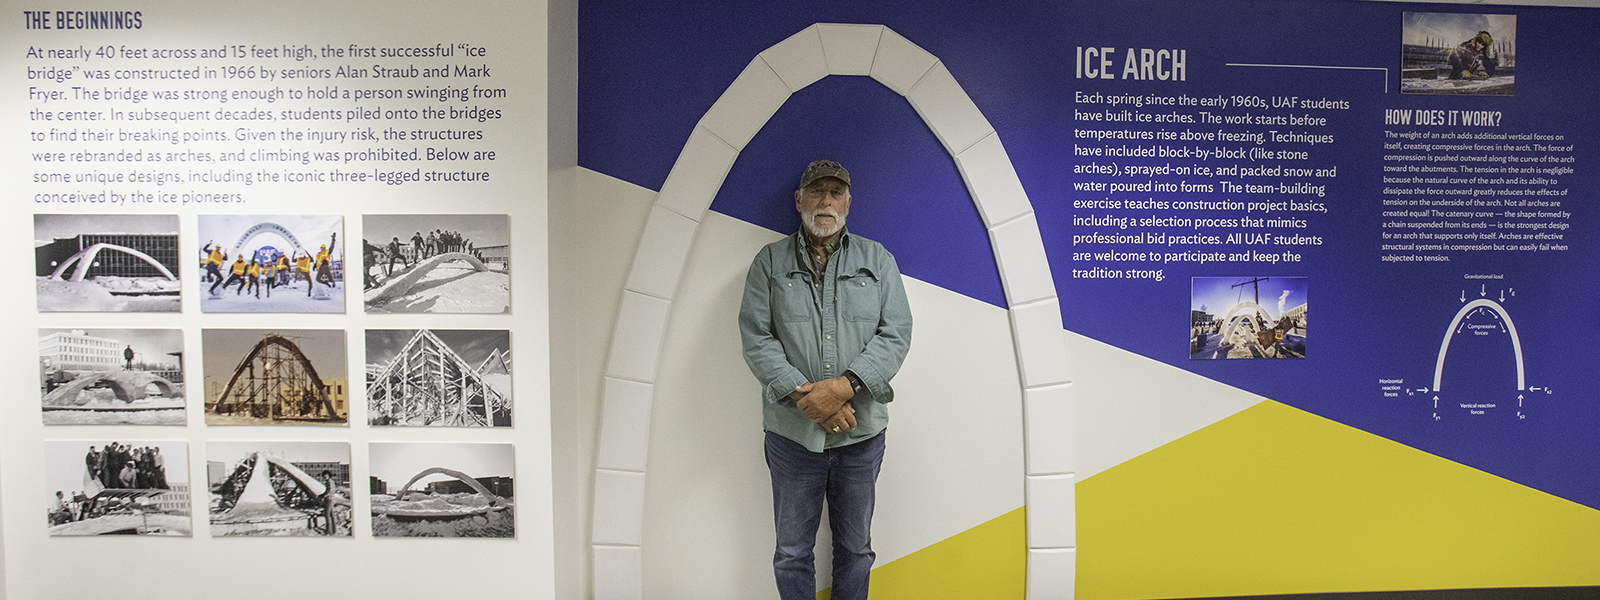 Alan Straub ’66 stands in front of the ice arch display in the College of Engineering and Mines during the 2022 Nanook Rendezvous alumni reunion. He was one of the two students who constructed the first successful ice bridge on the campus. 